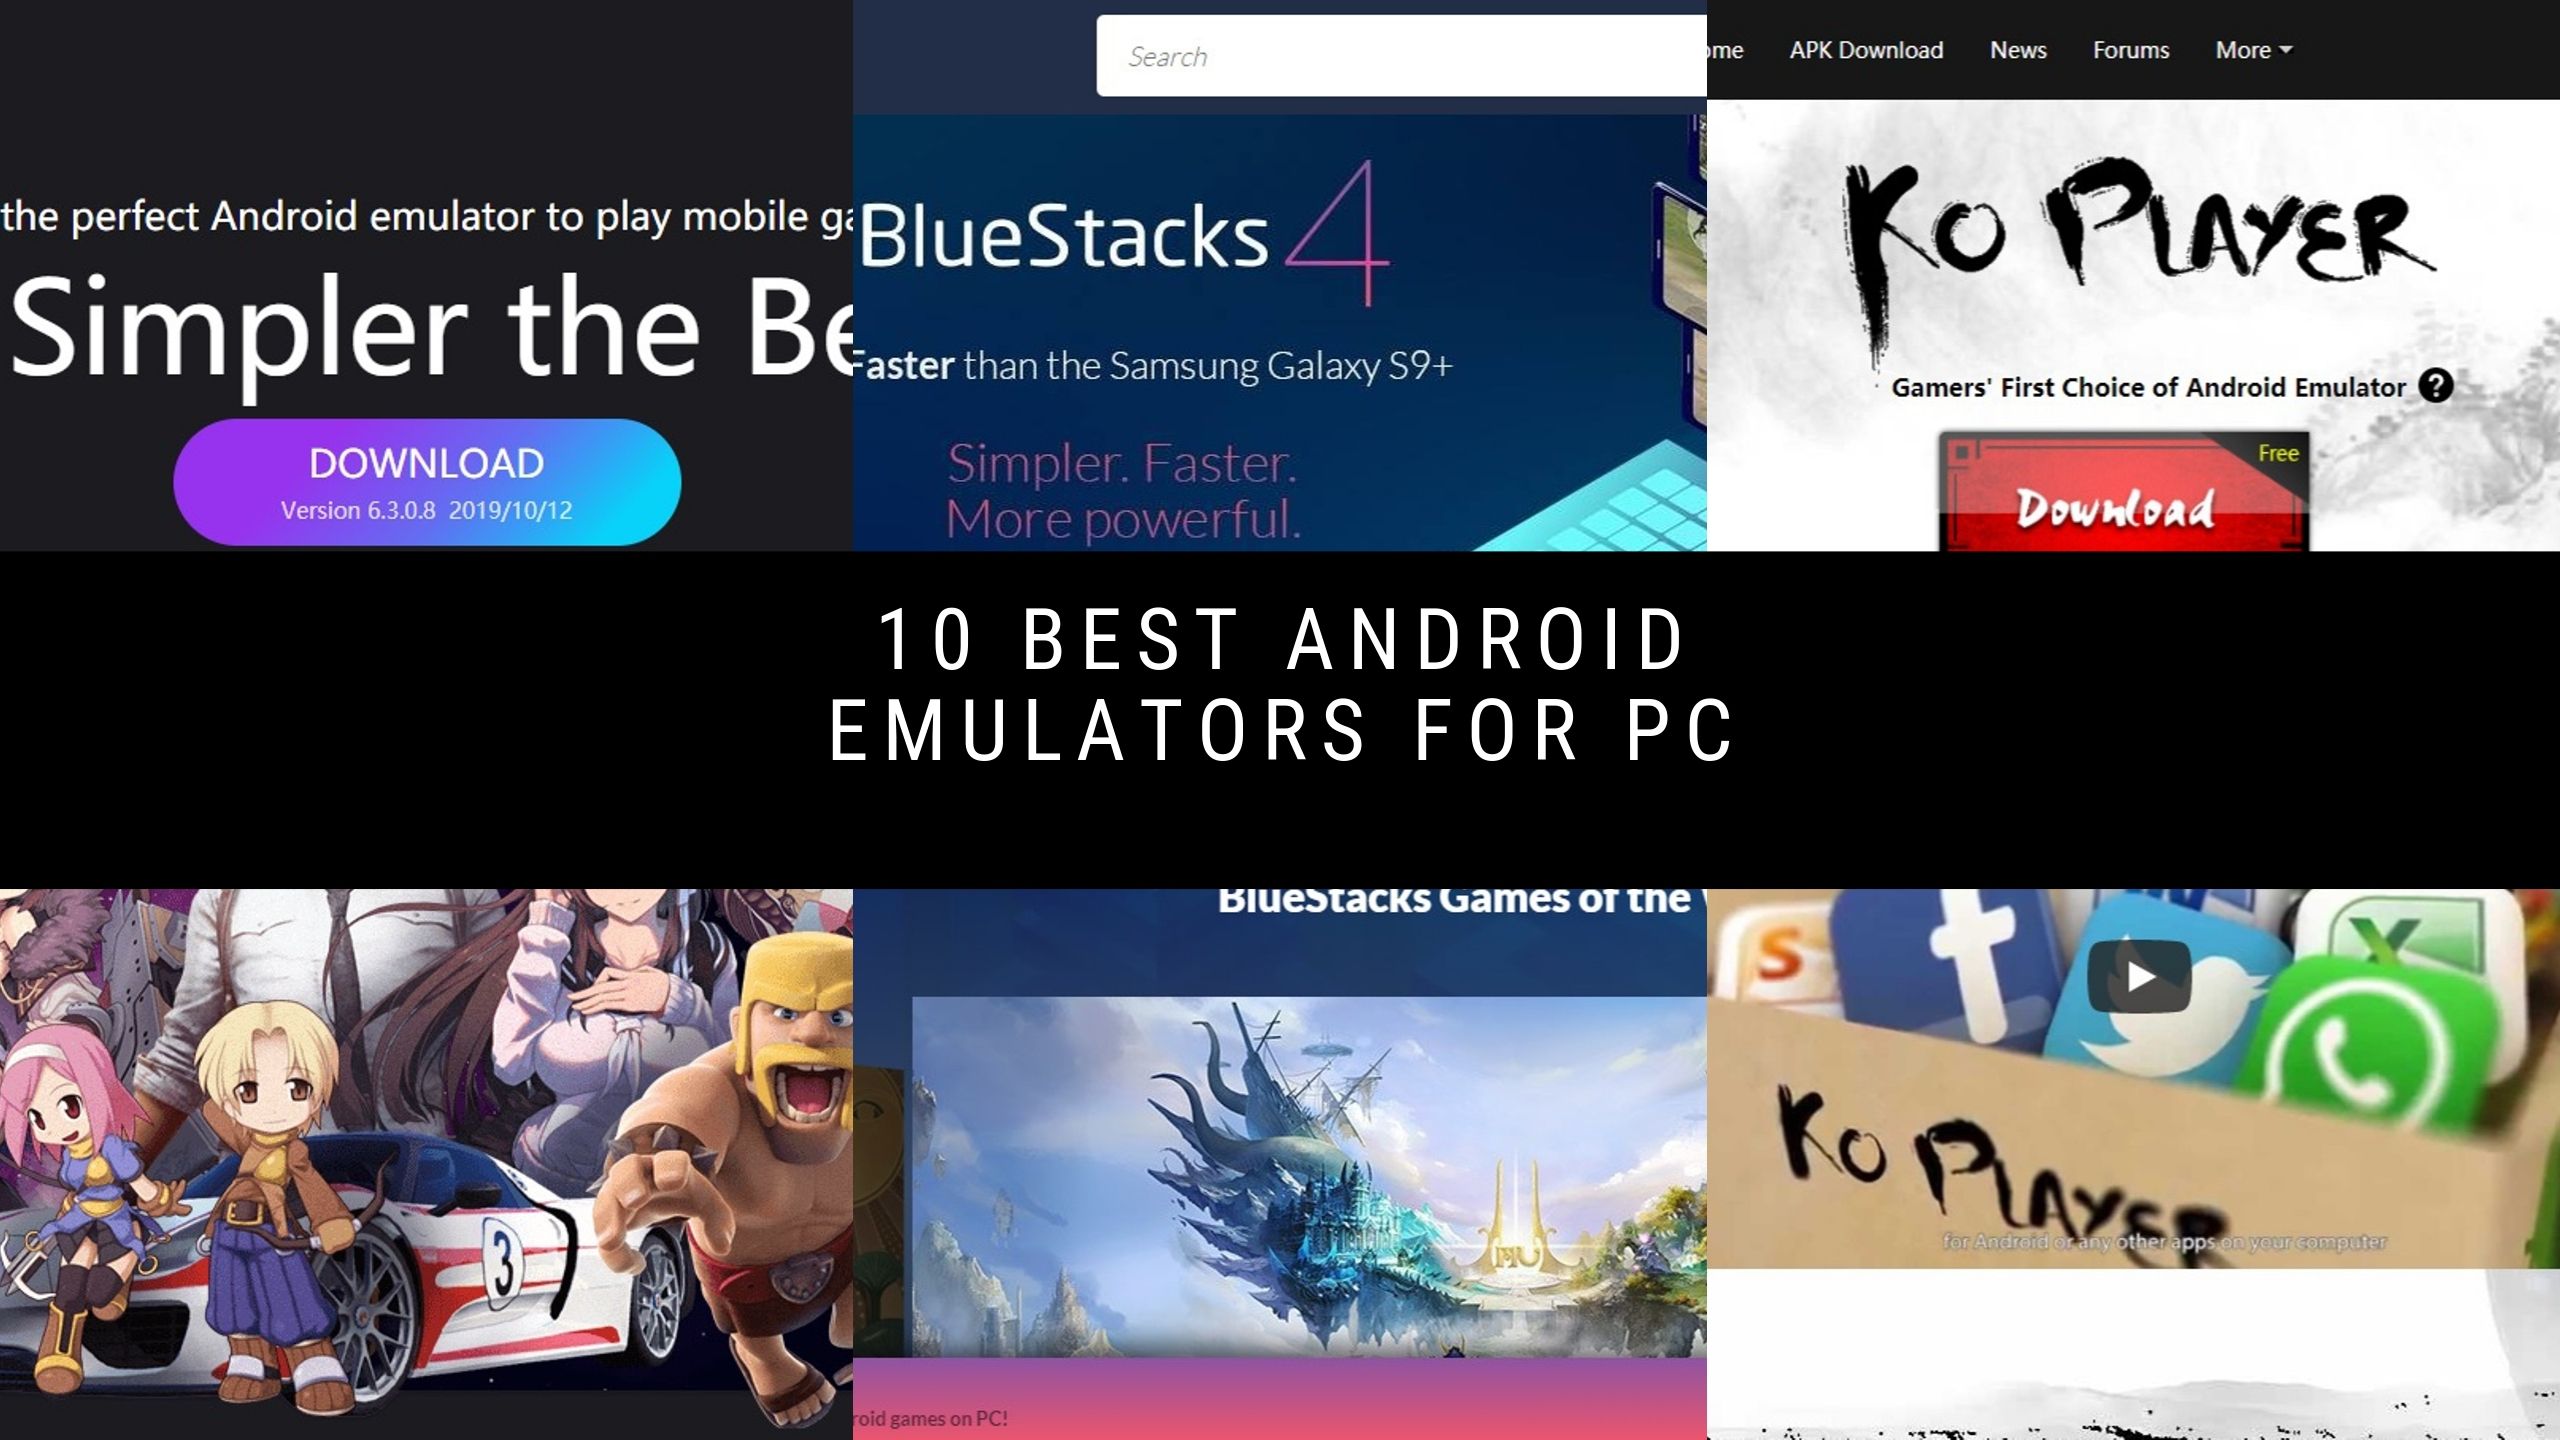 Best Android Emulators for PC